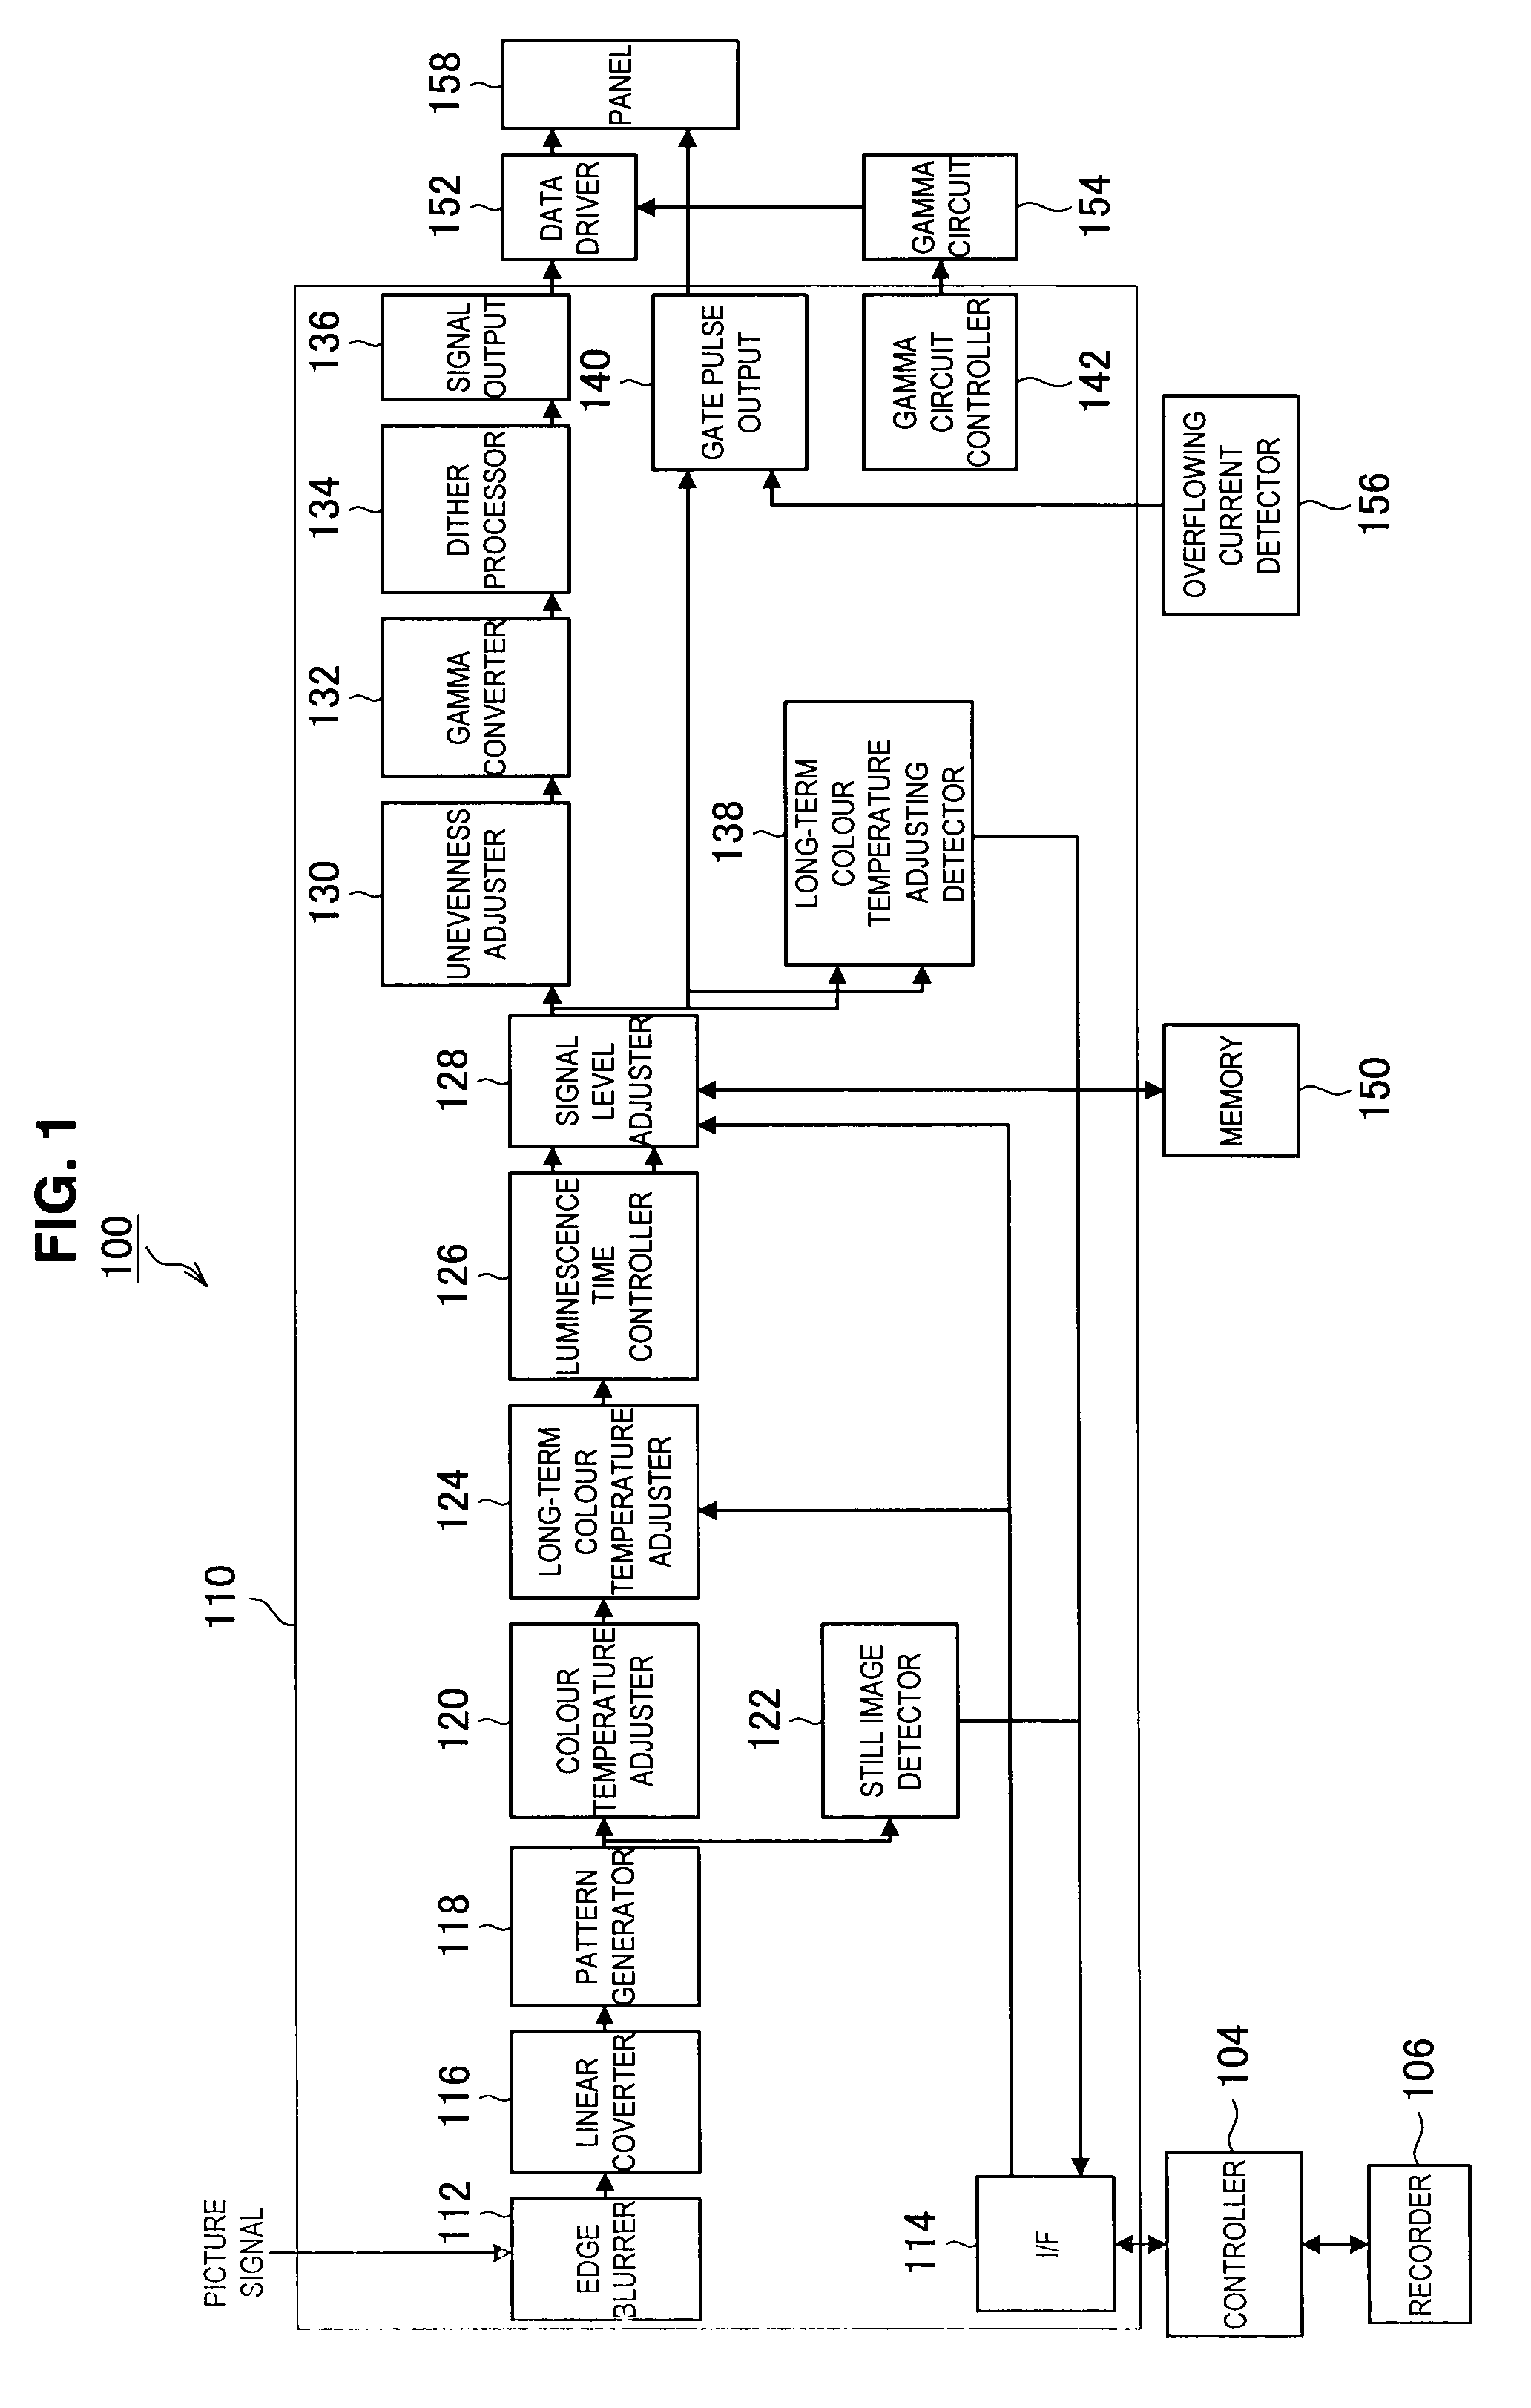 Display device, method of driving display device, and computer program